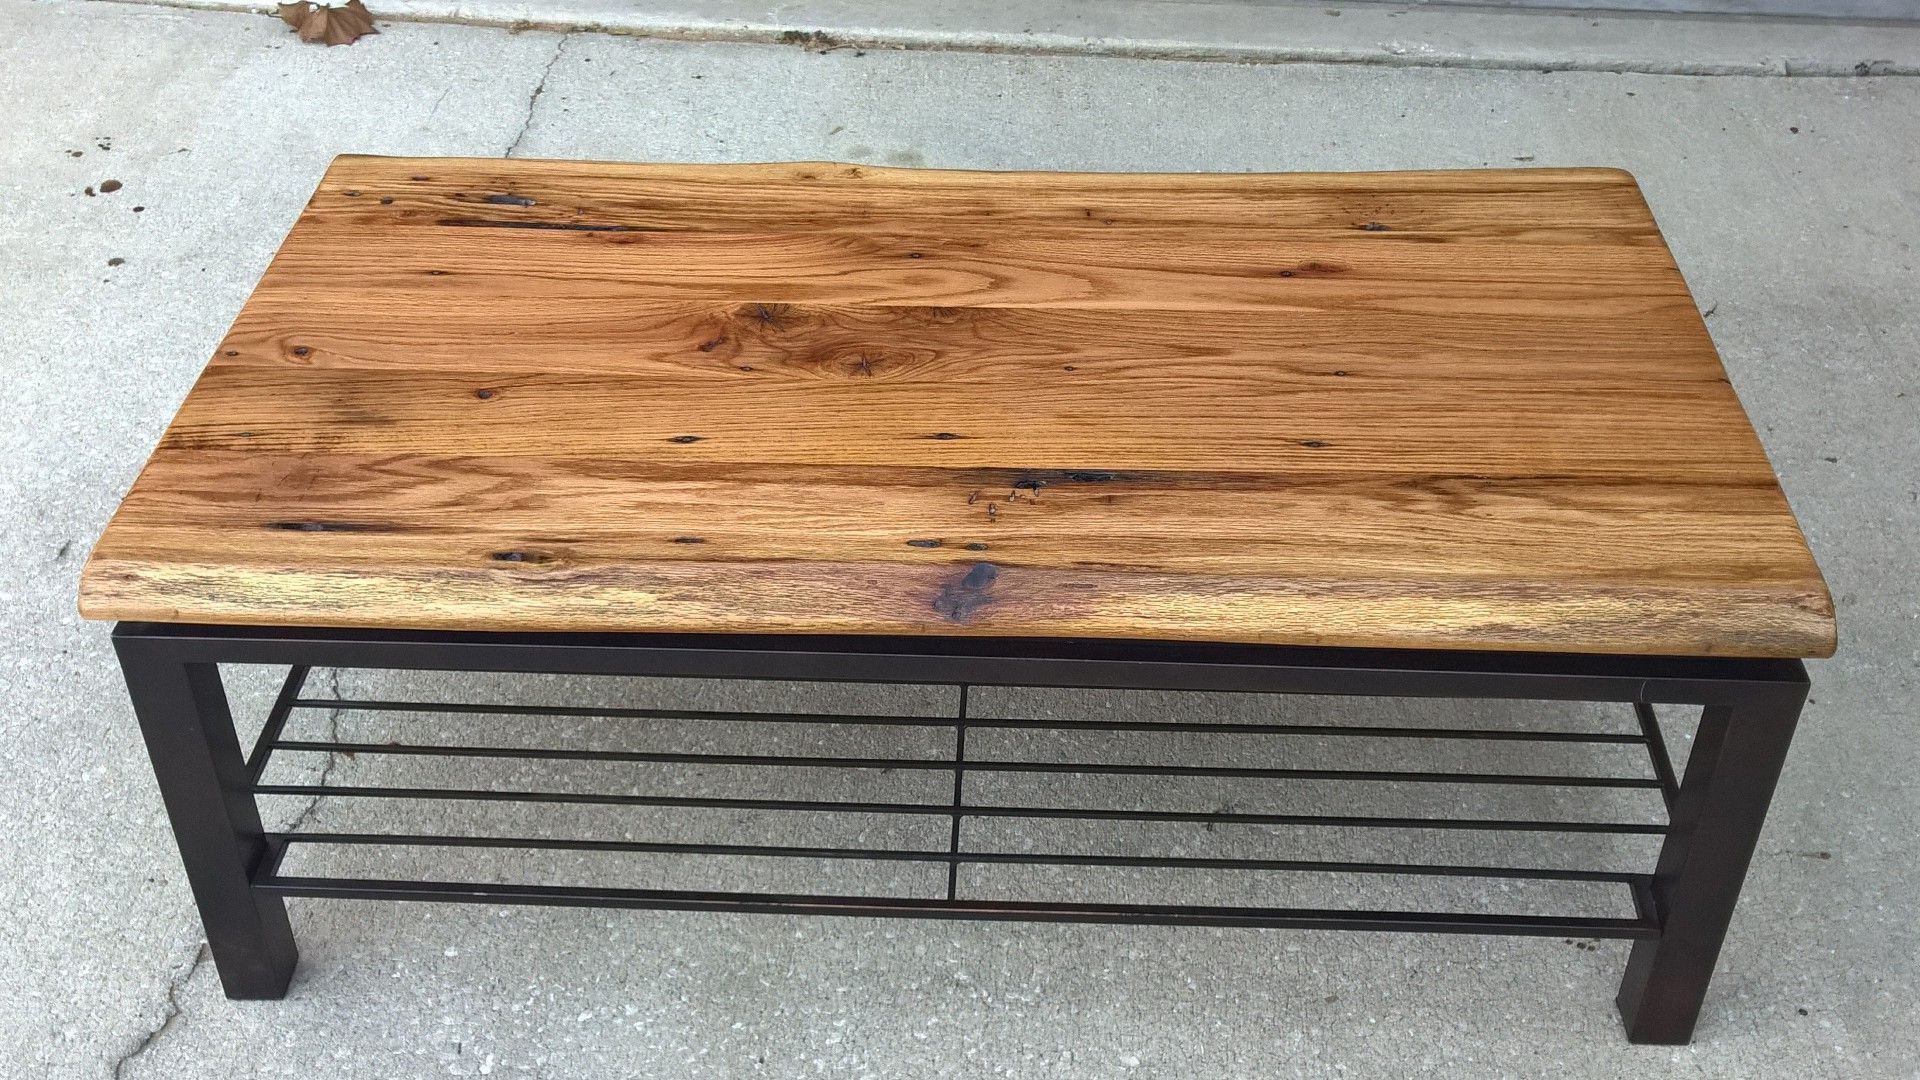 Live Edge Oak Coffee Table With Anodized Bronze Steel Base Inside Popular Metal And Oak Coffee Tables (View 10 of 20)